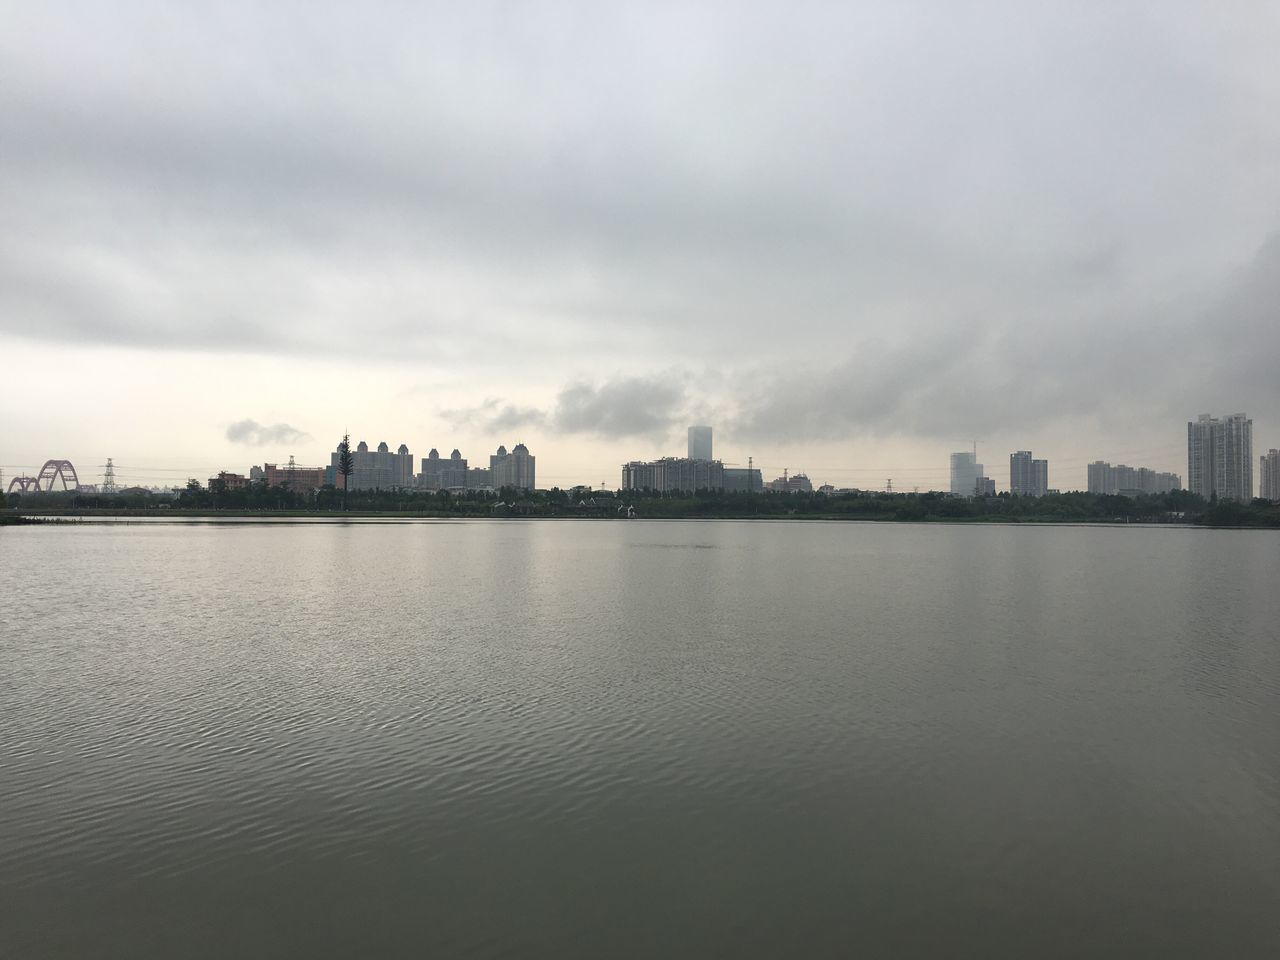 water, sky, building exterior, waterfront, architecture, built structure, city, sea, cloud - sky, cloudy, cloud, river, rippled, cityscape, tranquility, scenics, tranquil scene, nature, dusk, overcast